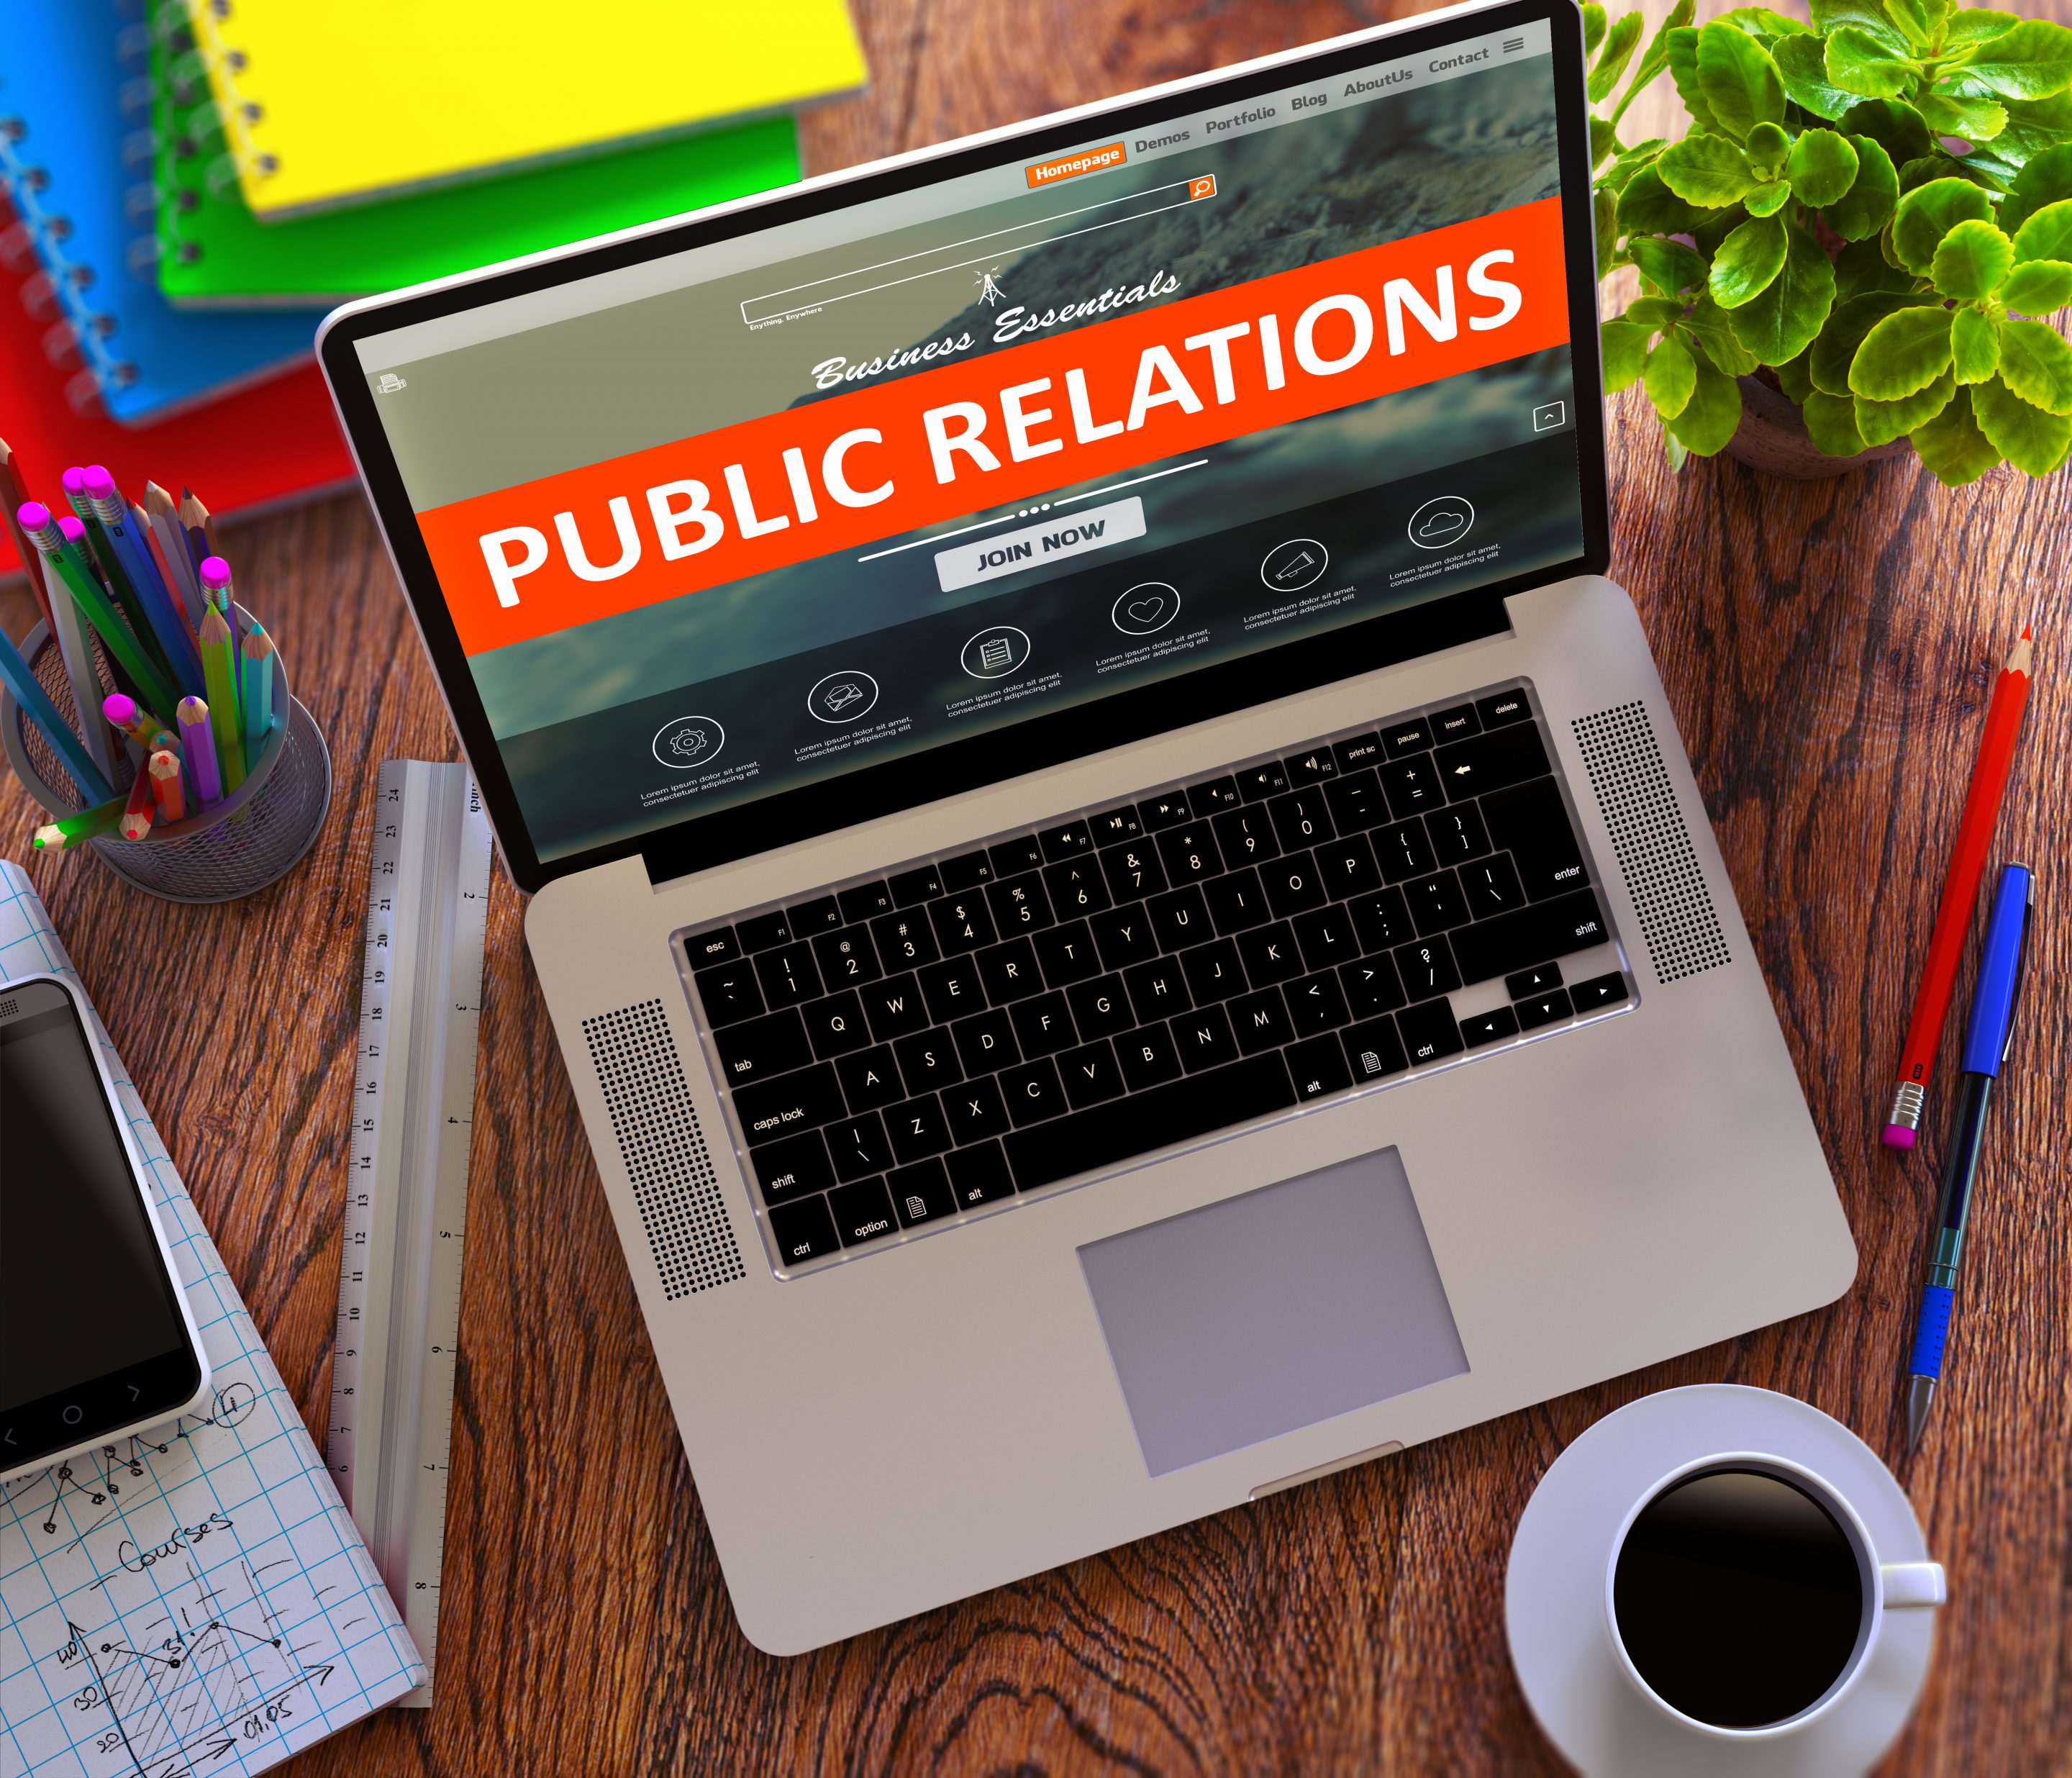 Public Relations on a laptop screen.